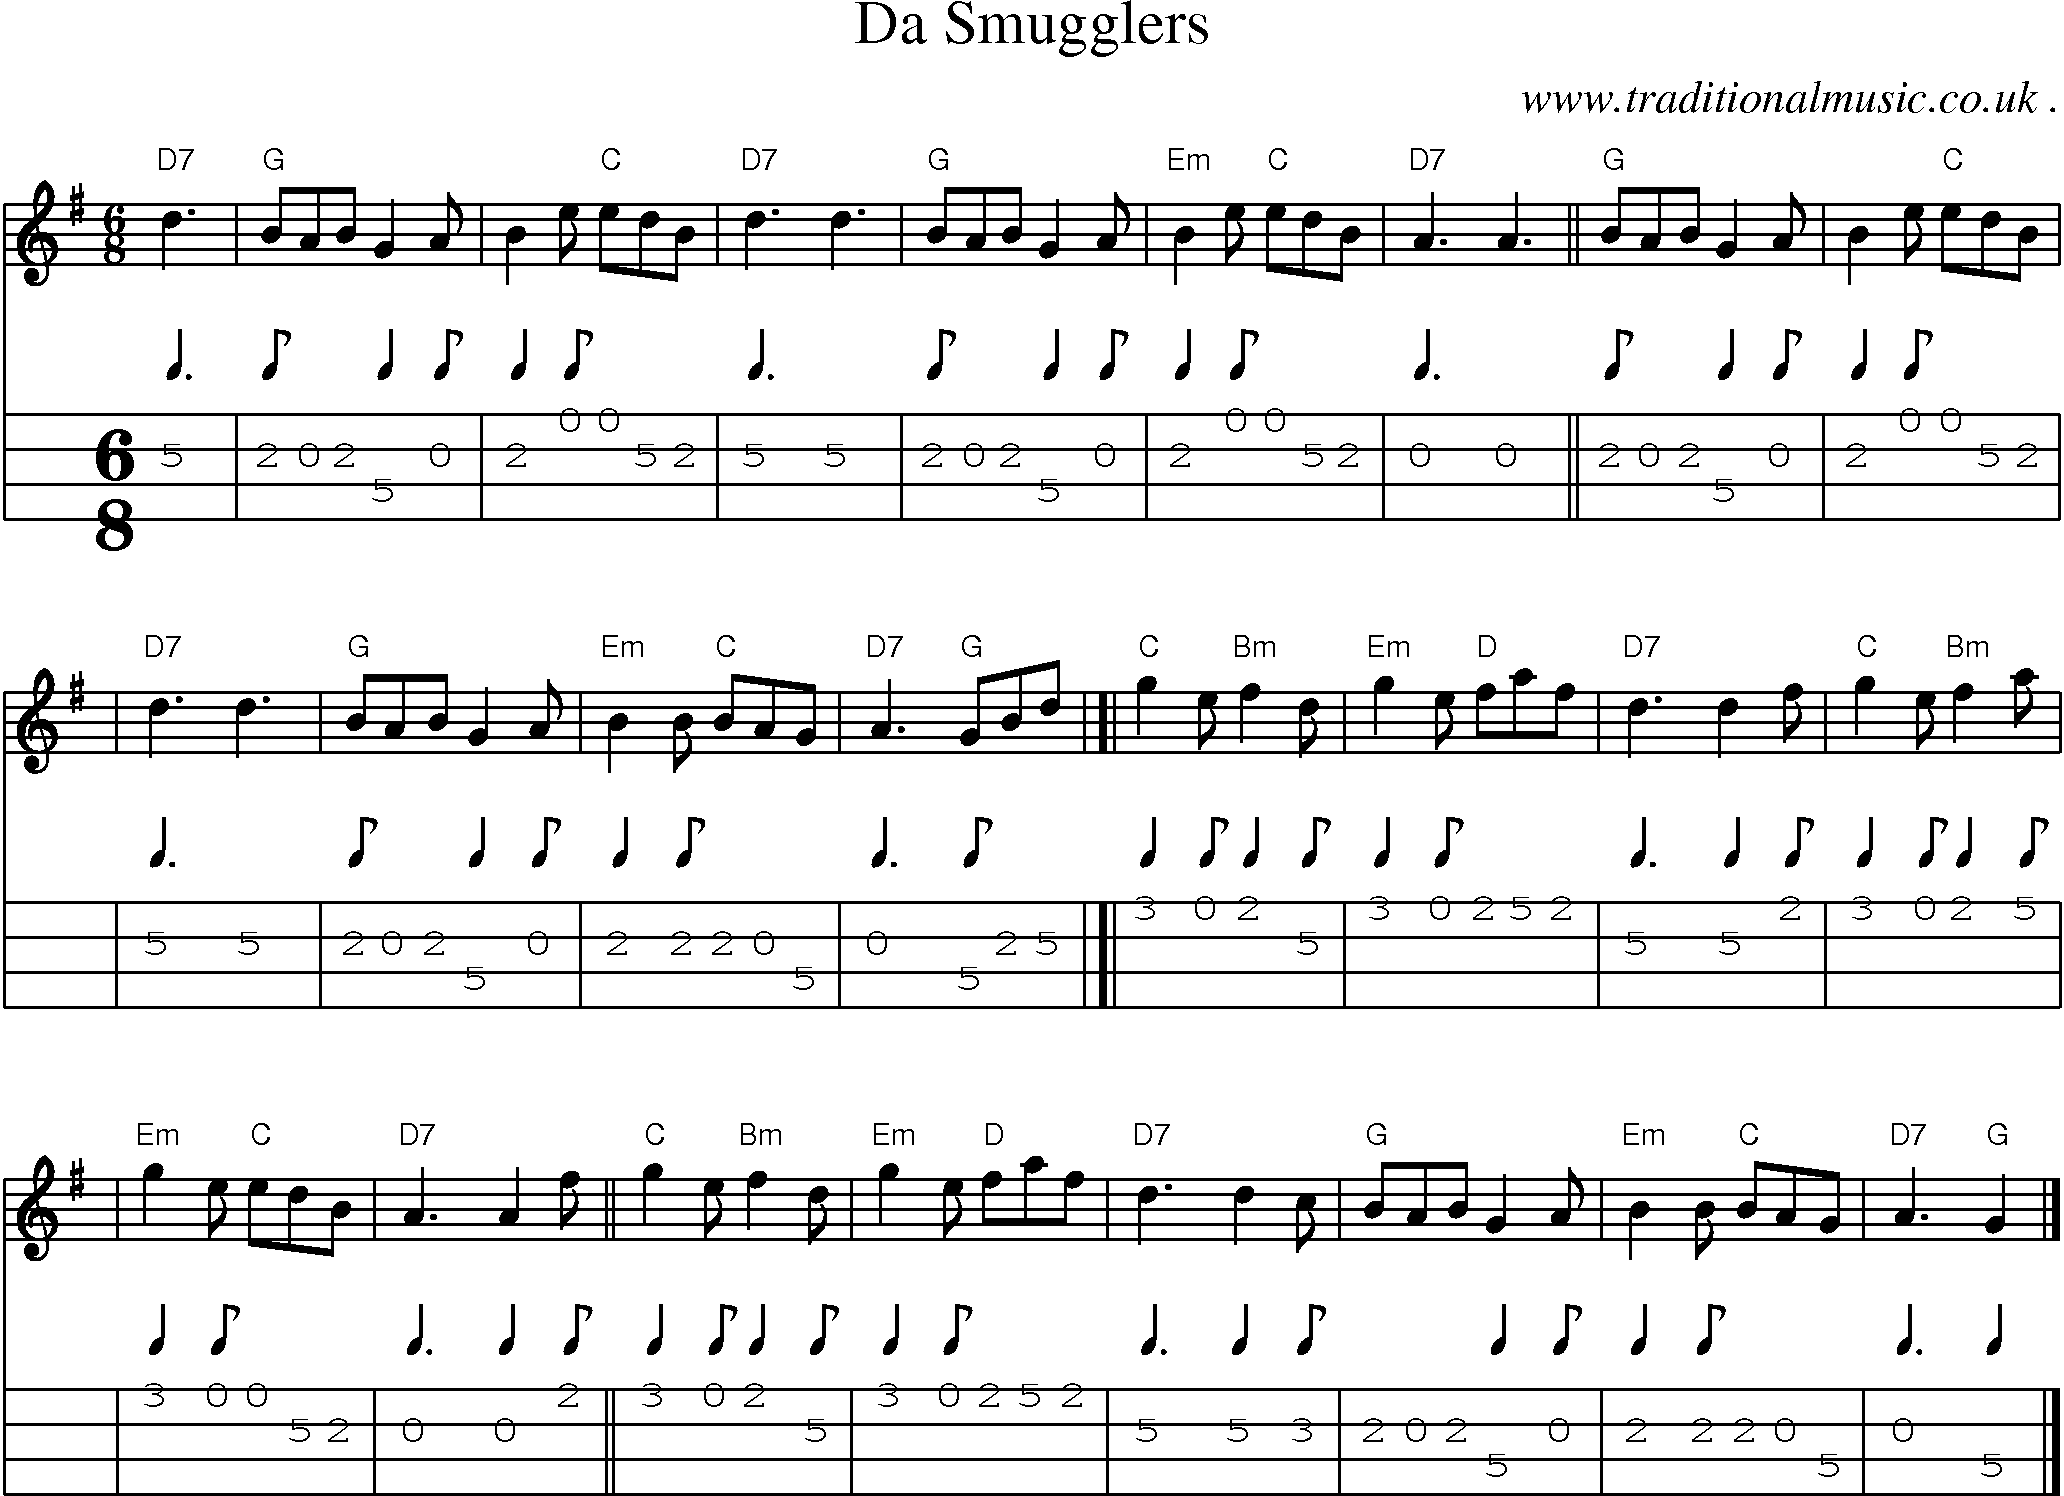 Sheet-music  score, Chords and Mandolin Tabs for Da Smugglers